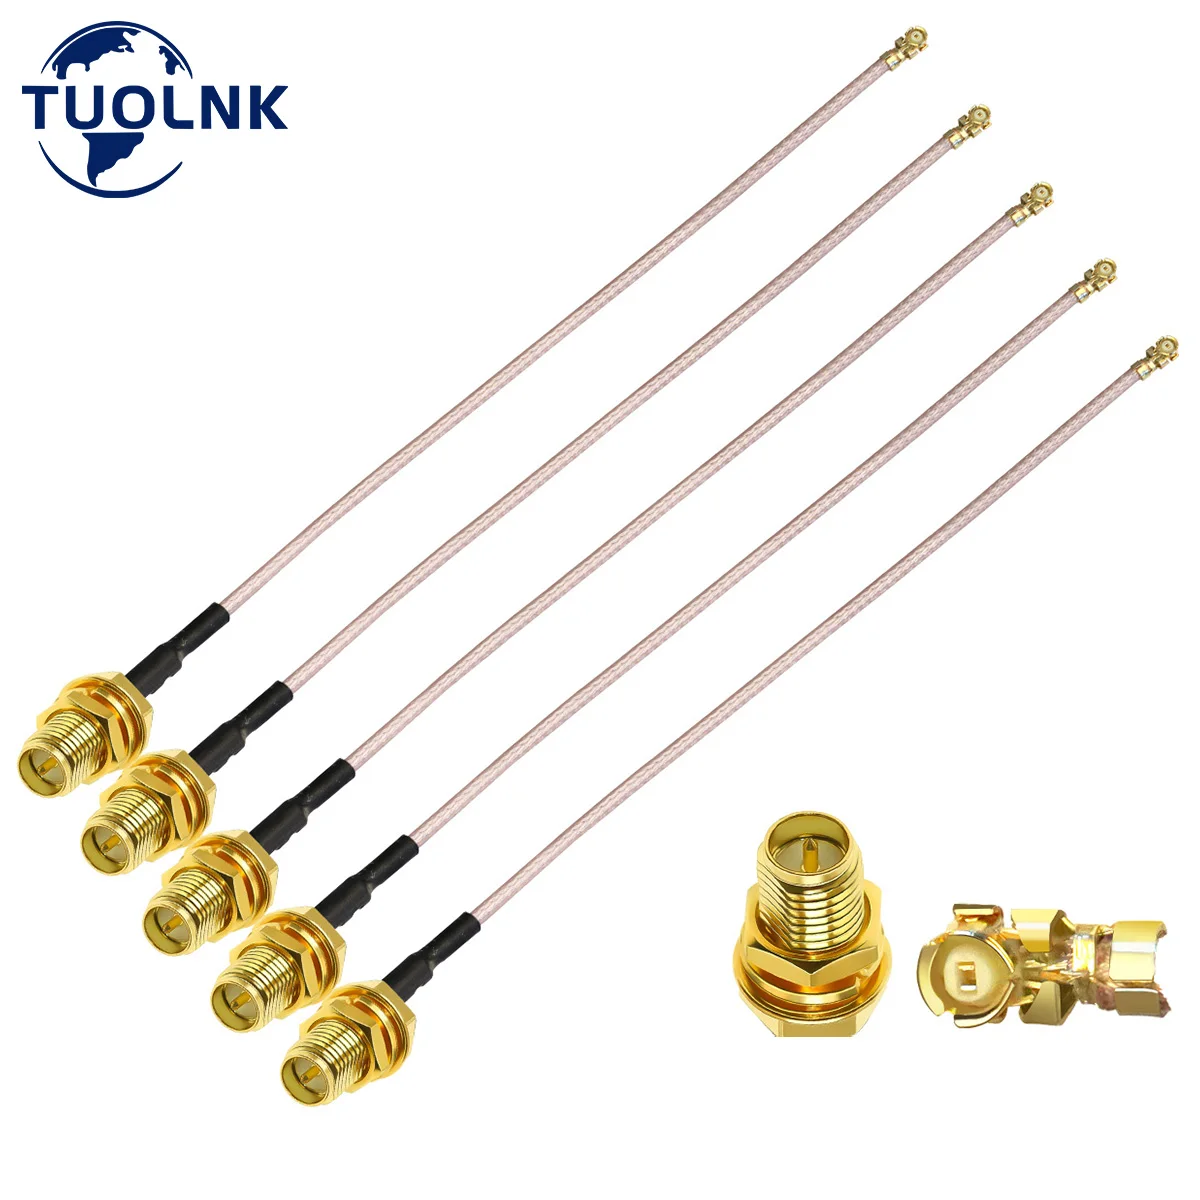 

5PackUFL SMA U.FL/IPX to RP-SMA Female Pigtail Coaxial Low Loss Cable Extension Antenna Coax Cable RG178